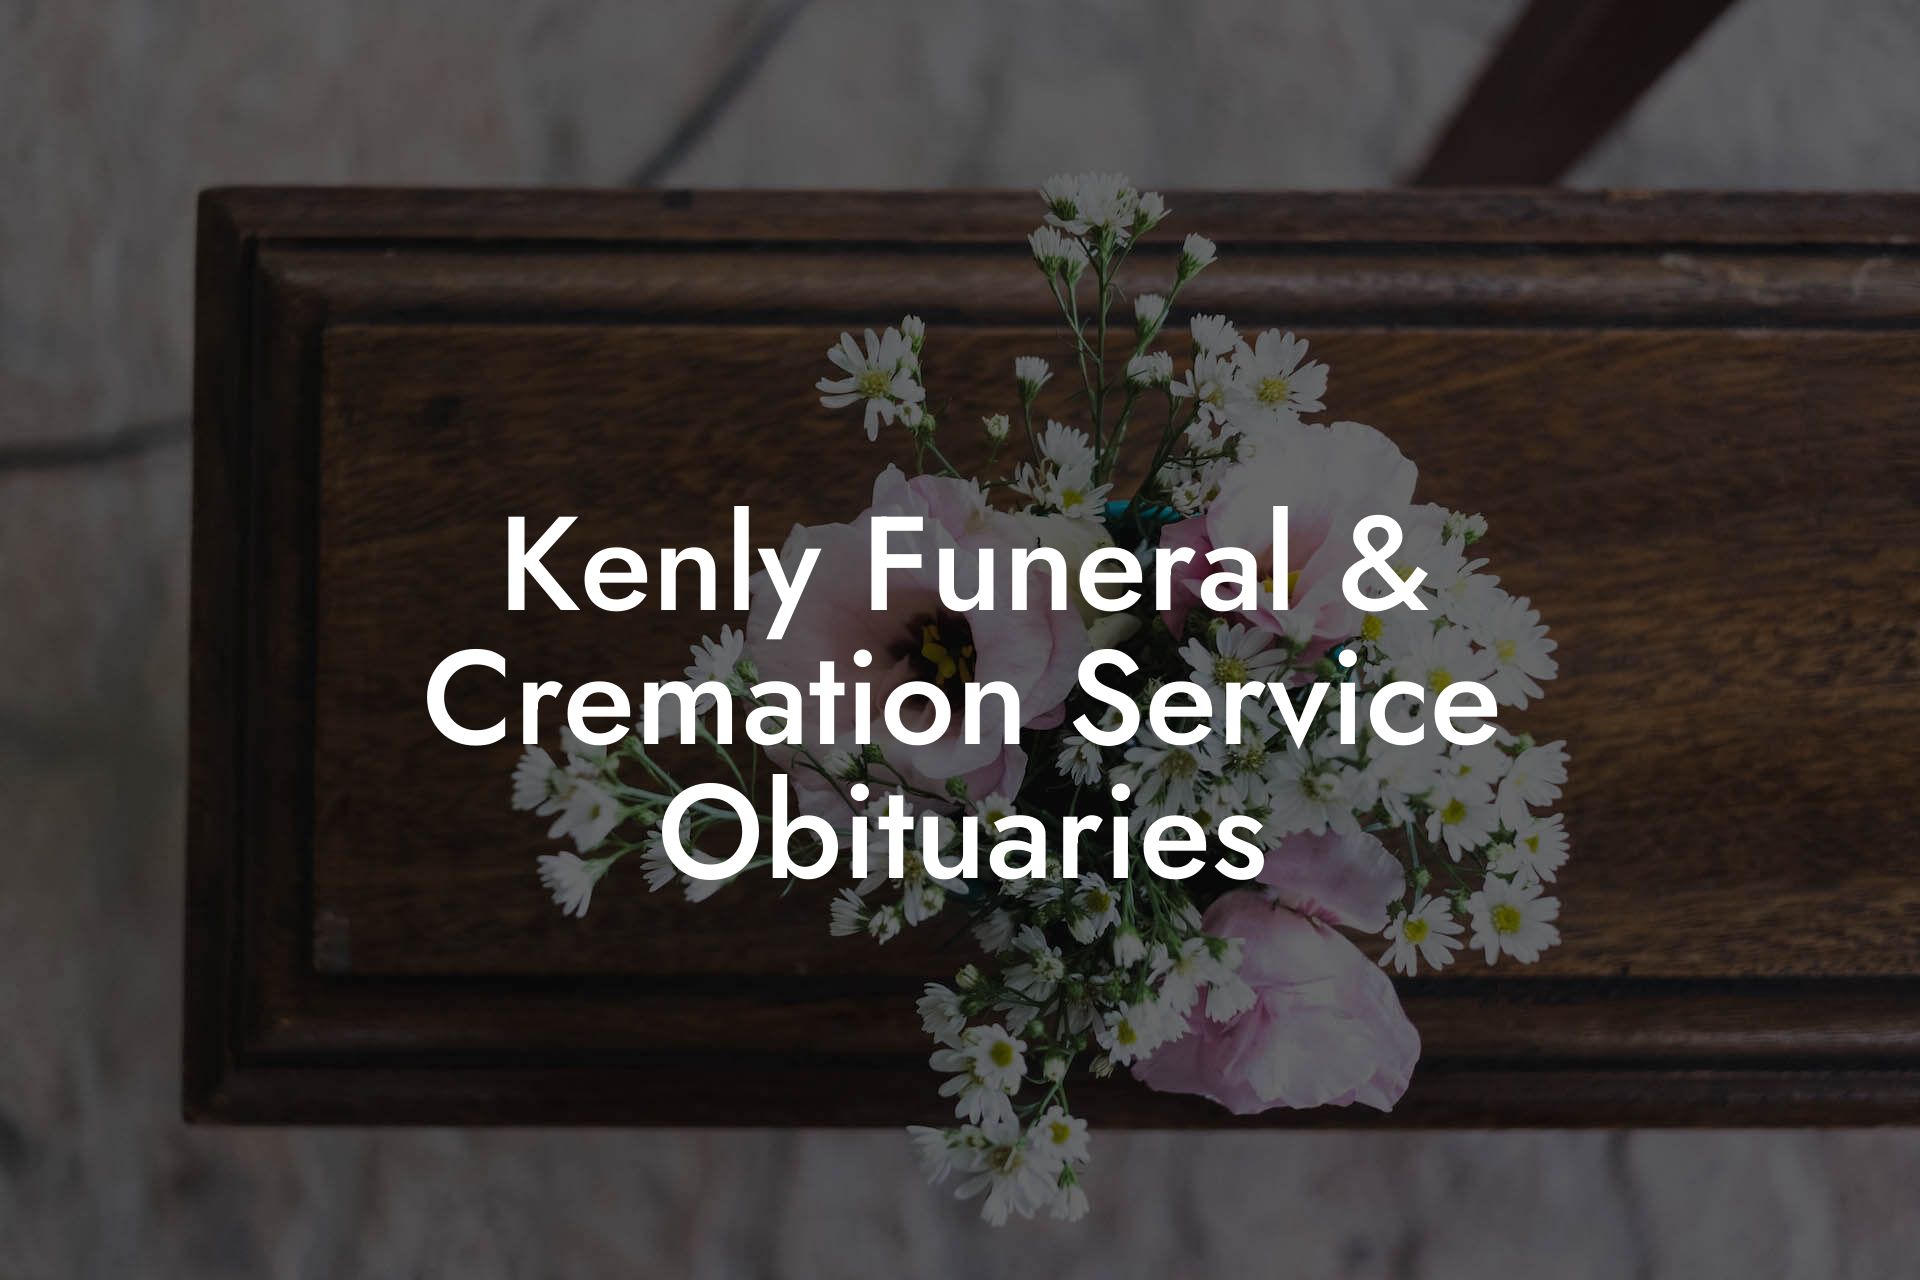 Kenly Funeral & Cremation Service Obituaries